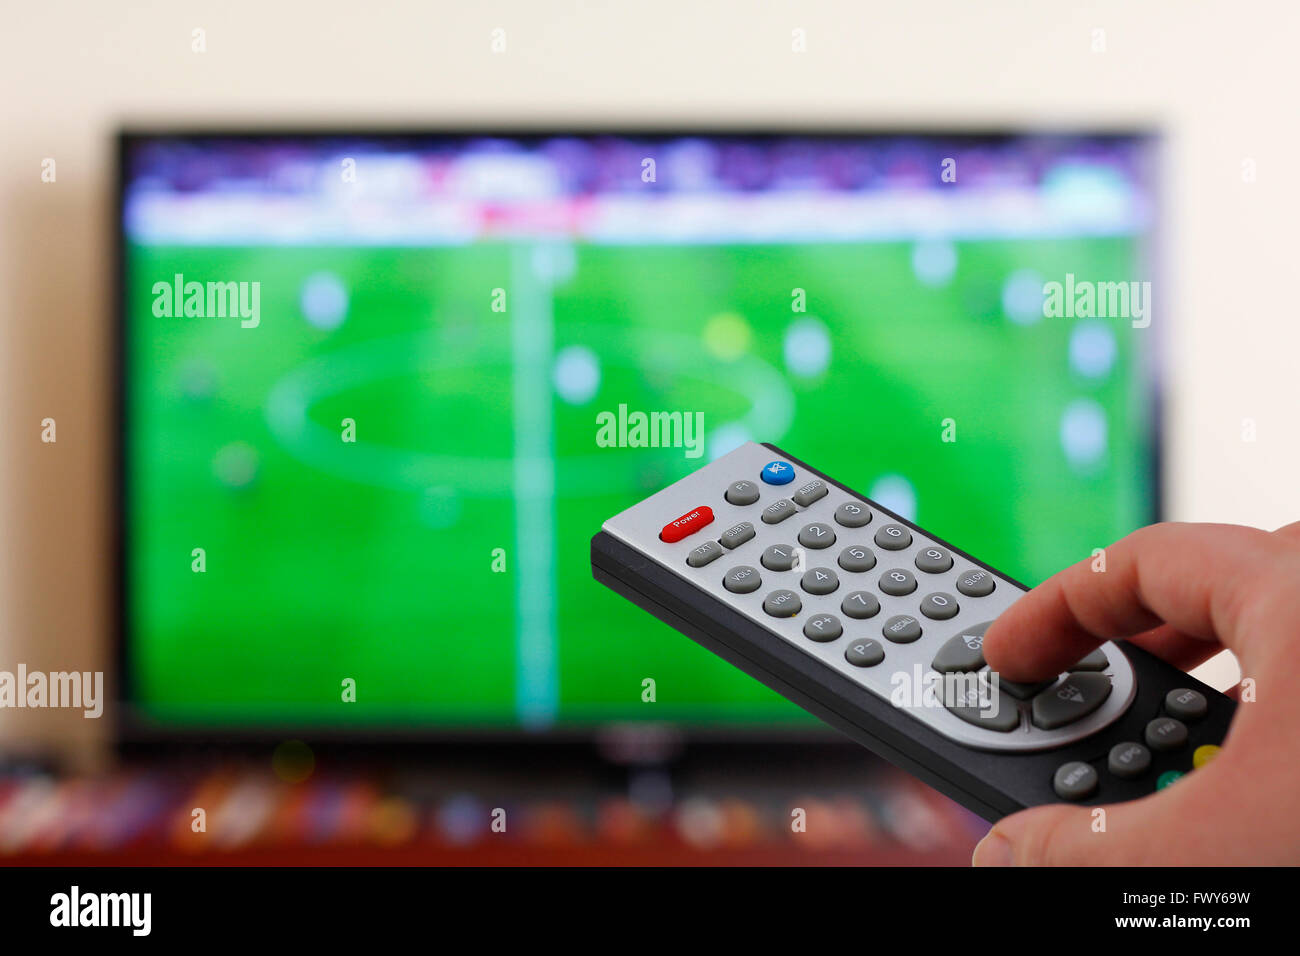 Watching a football match in the television, with a tv remote control in the hand Stock Photo